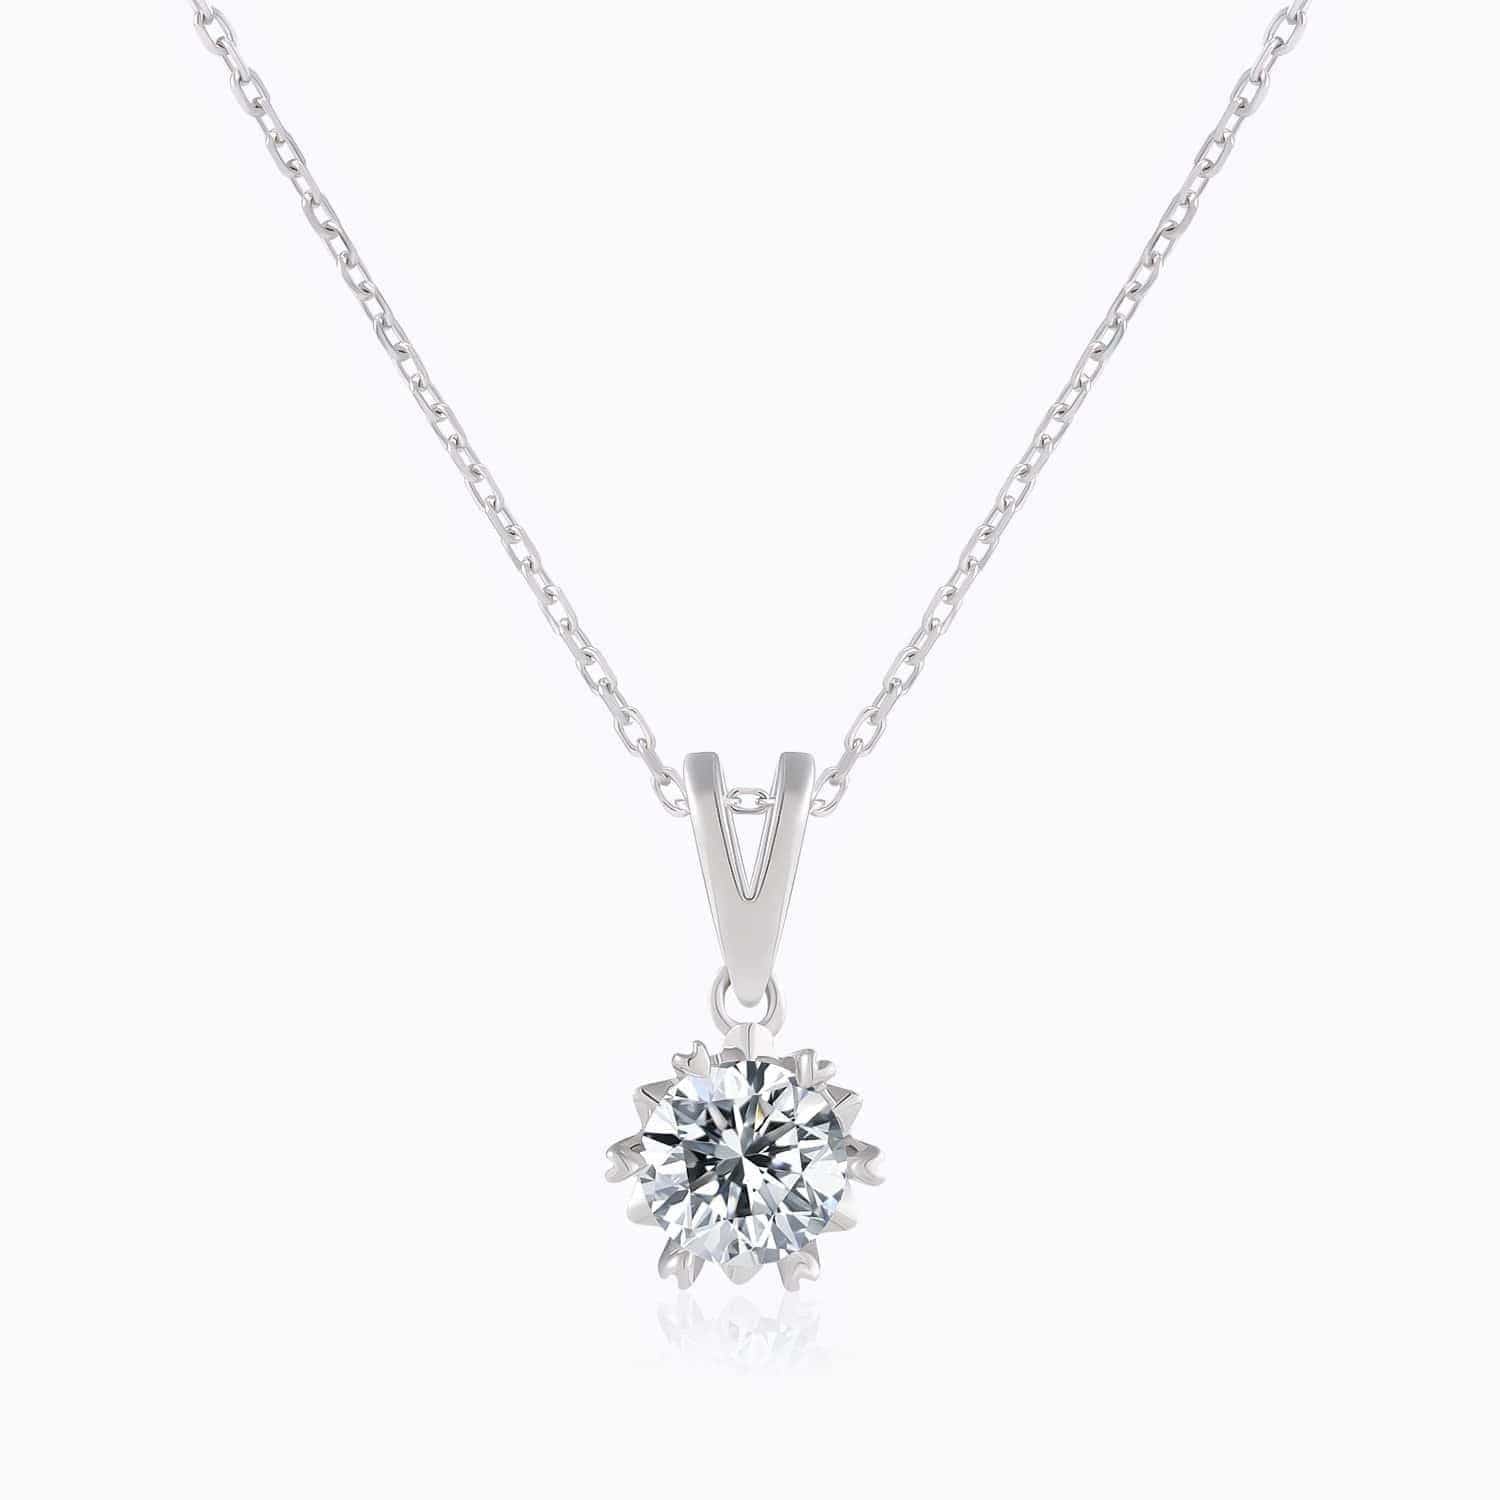 Moissanite Necklace With Round Solitaire Brilliant Cut Pendant Sterling Silver 1 Carat